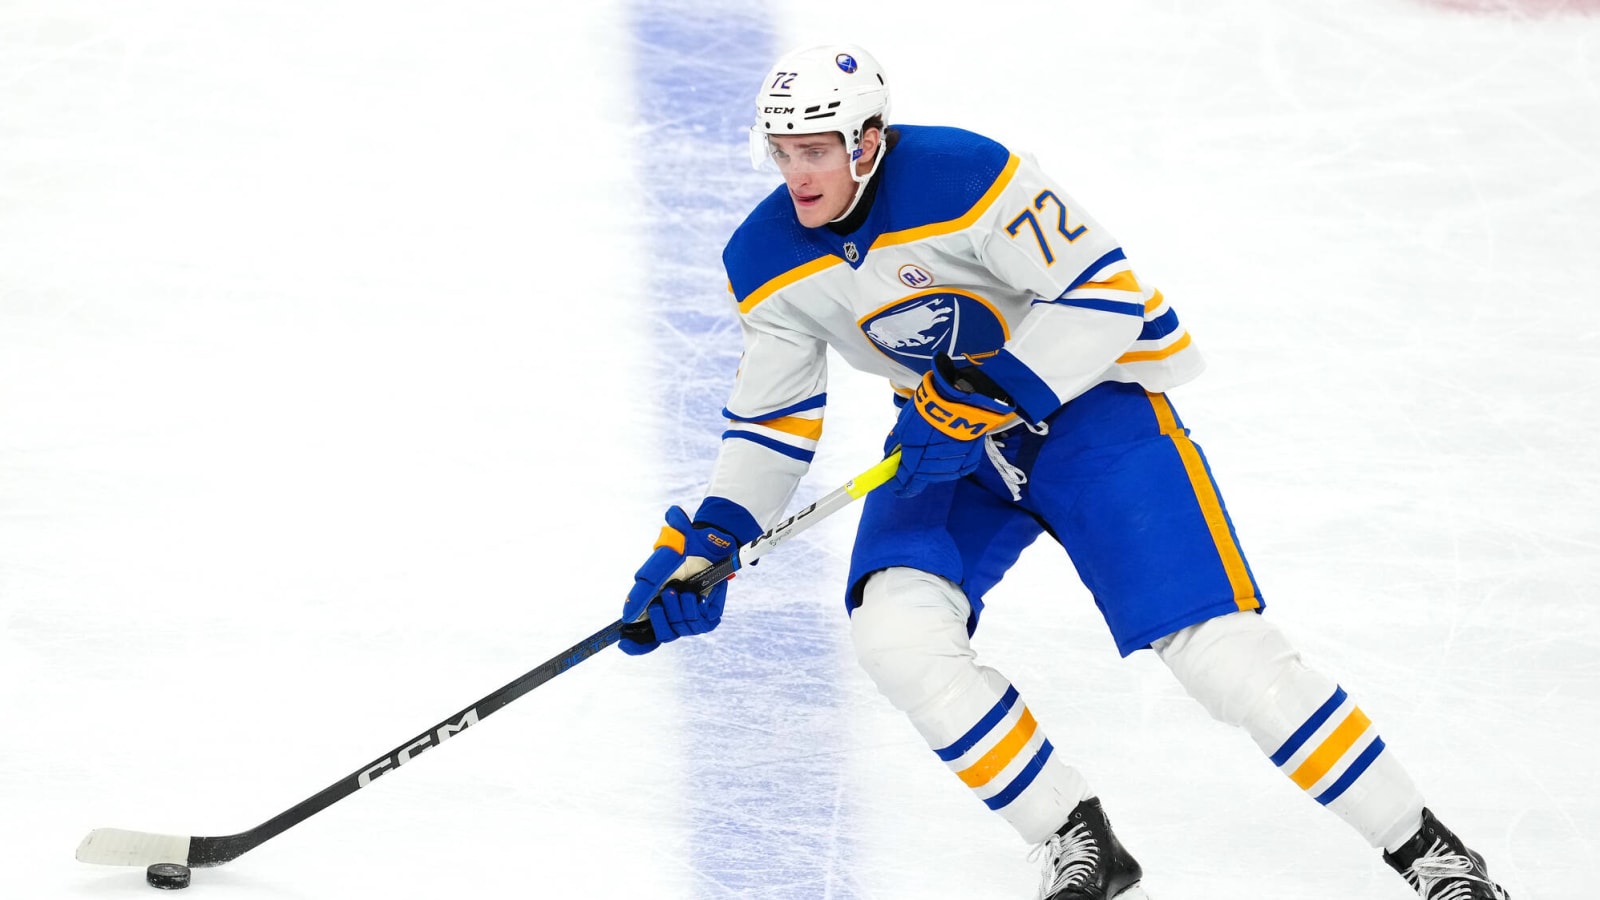 What’s Going On With Tage Thompson?